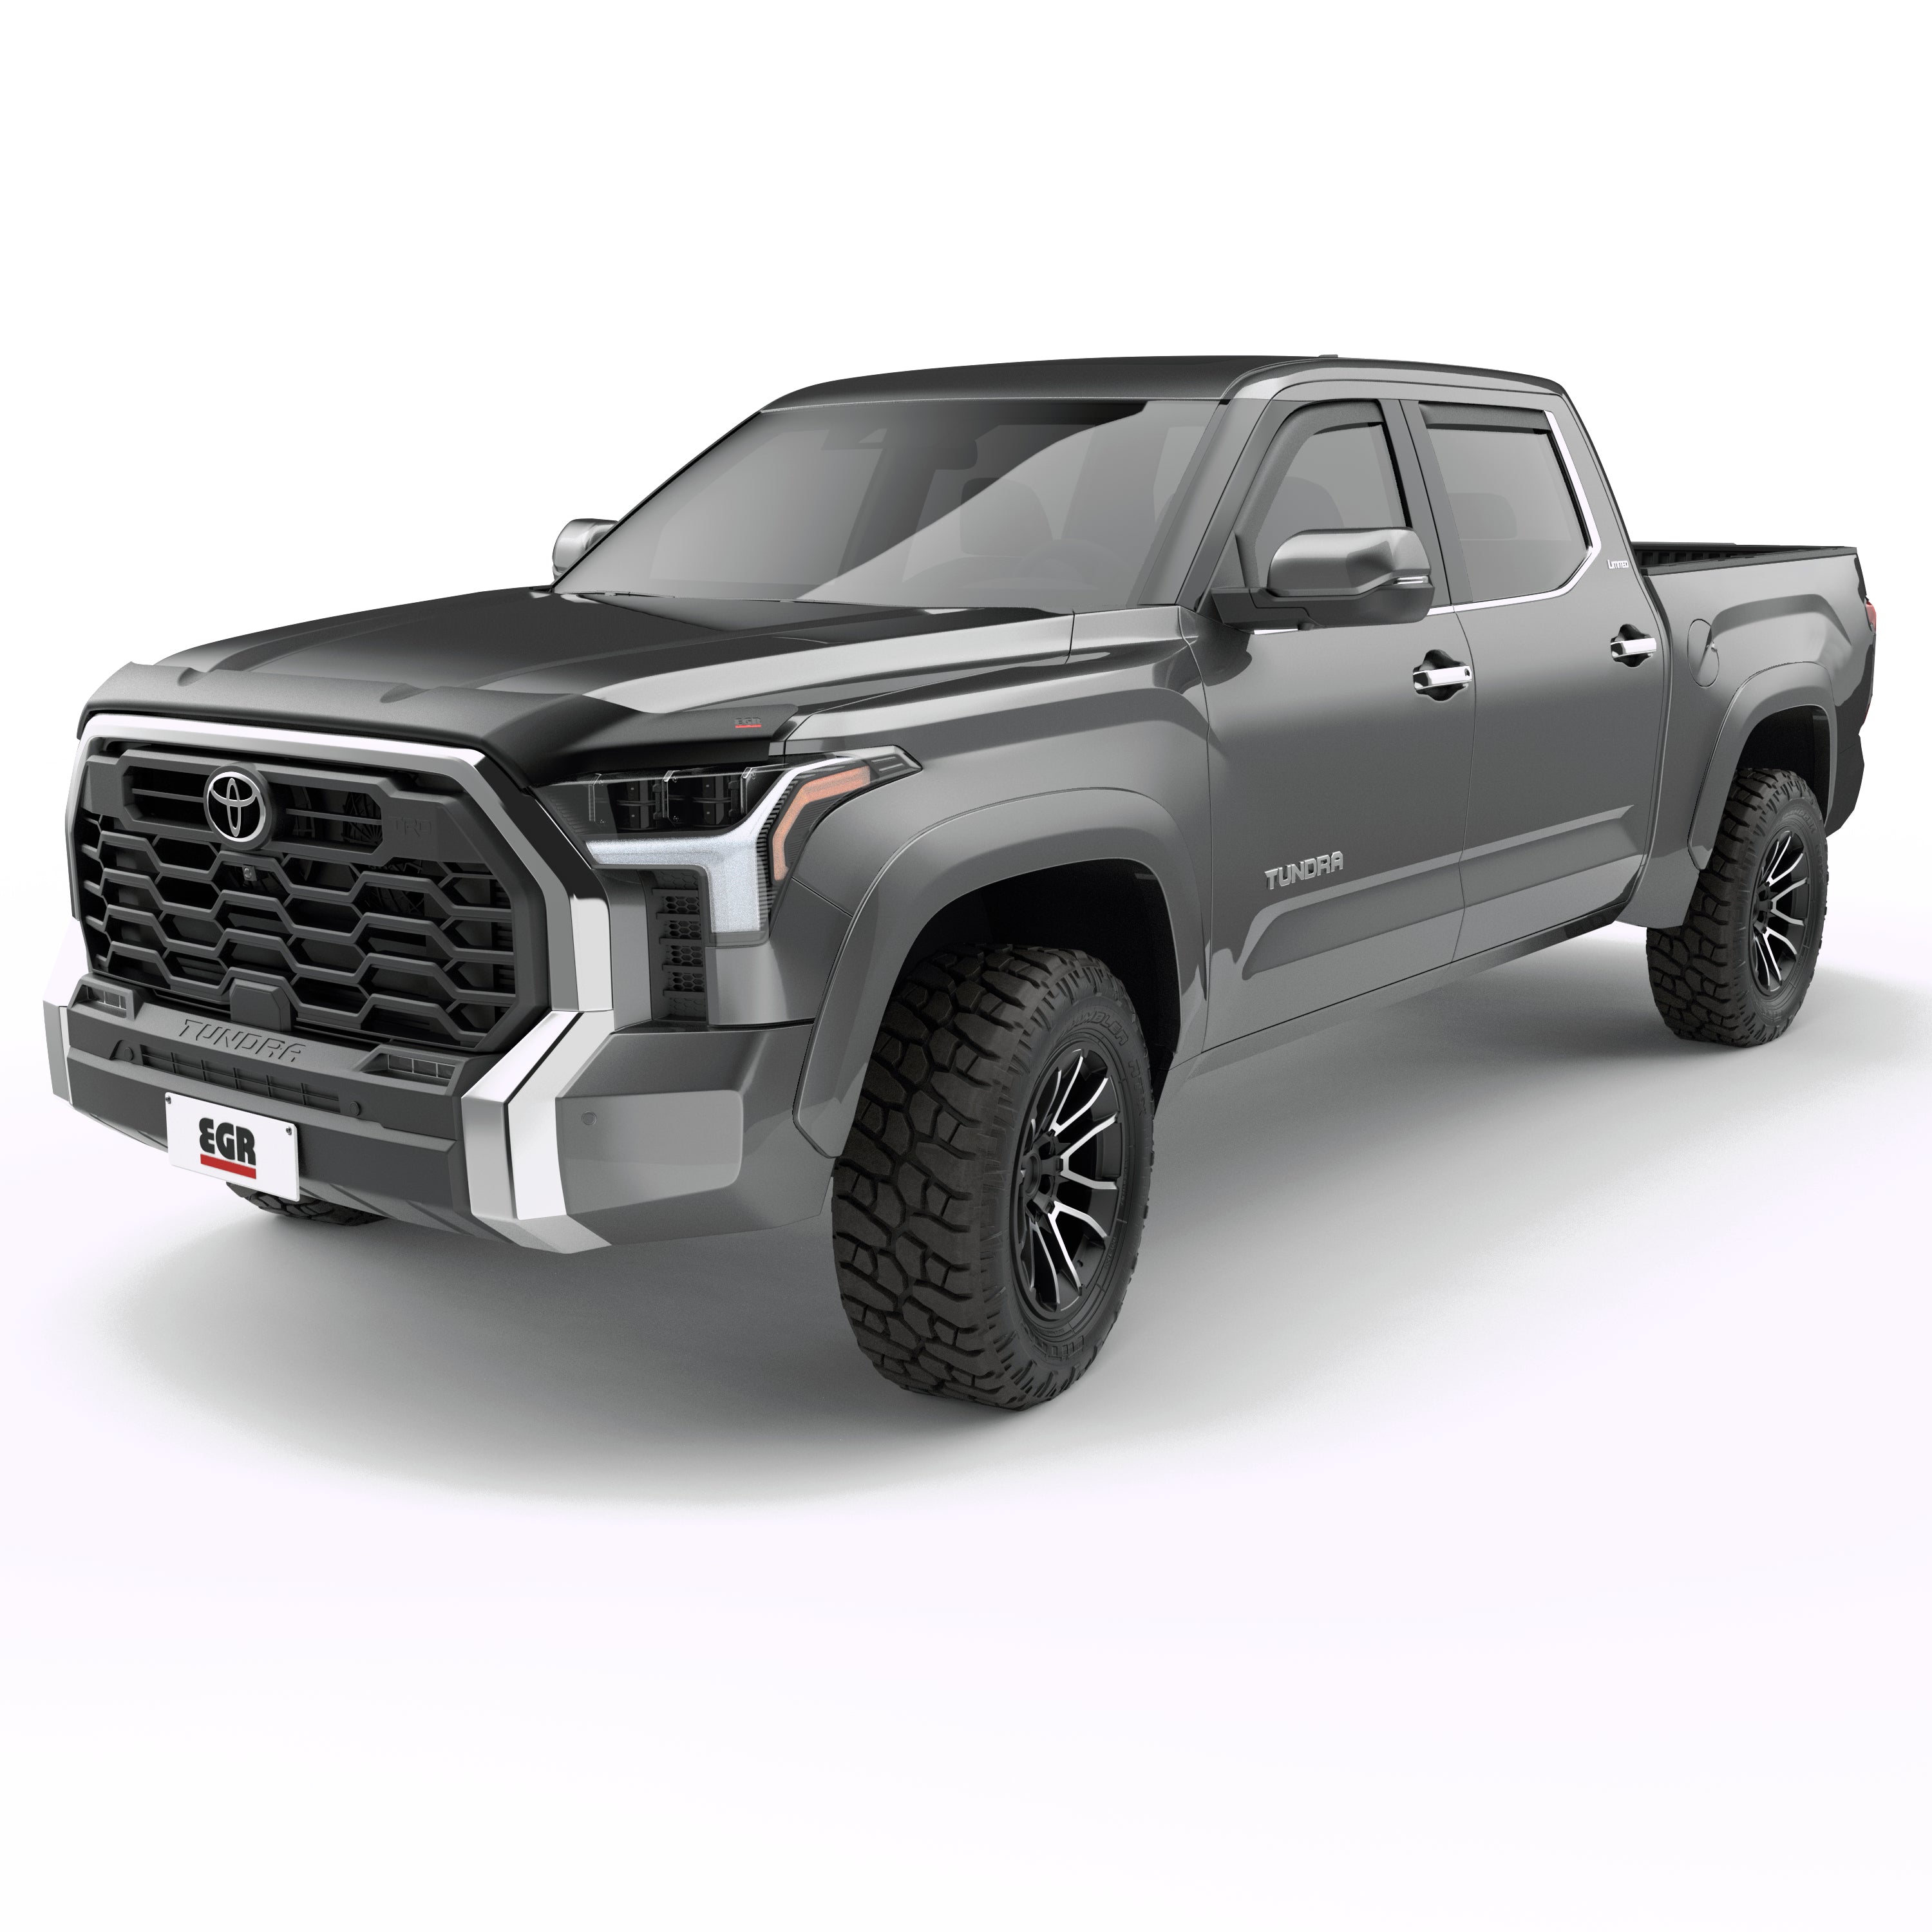 EGR 2022-2024 Toyota Tundra 4 Door Crew Cab Extended Cab Pickup Summit Fender Flares paint to code set of 4 775404-1G3